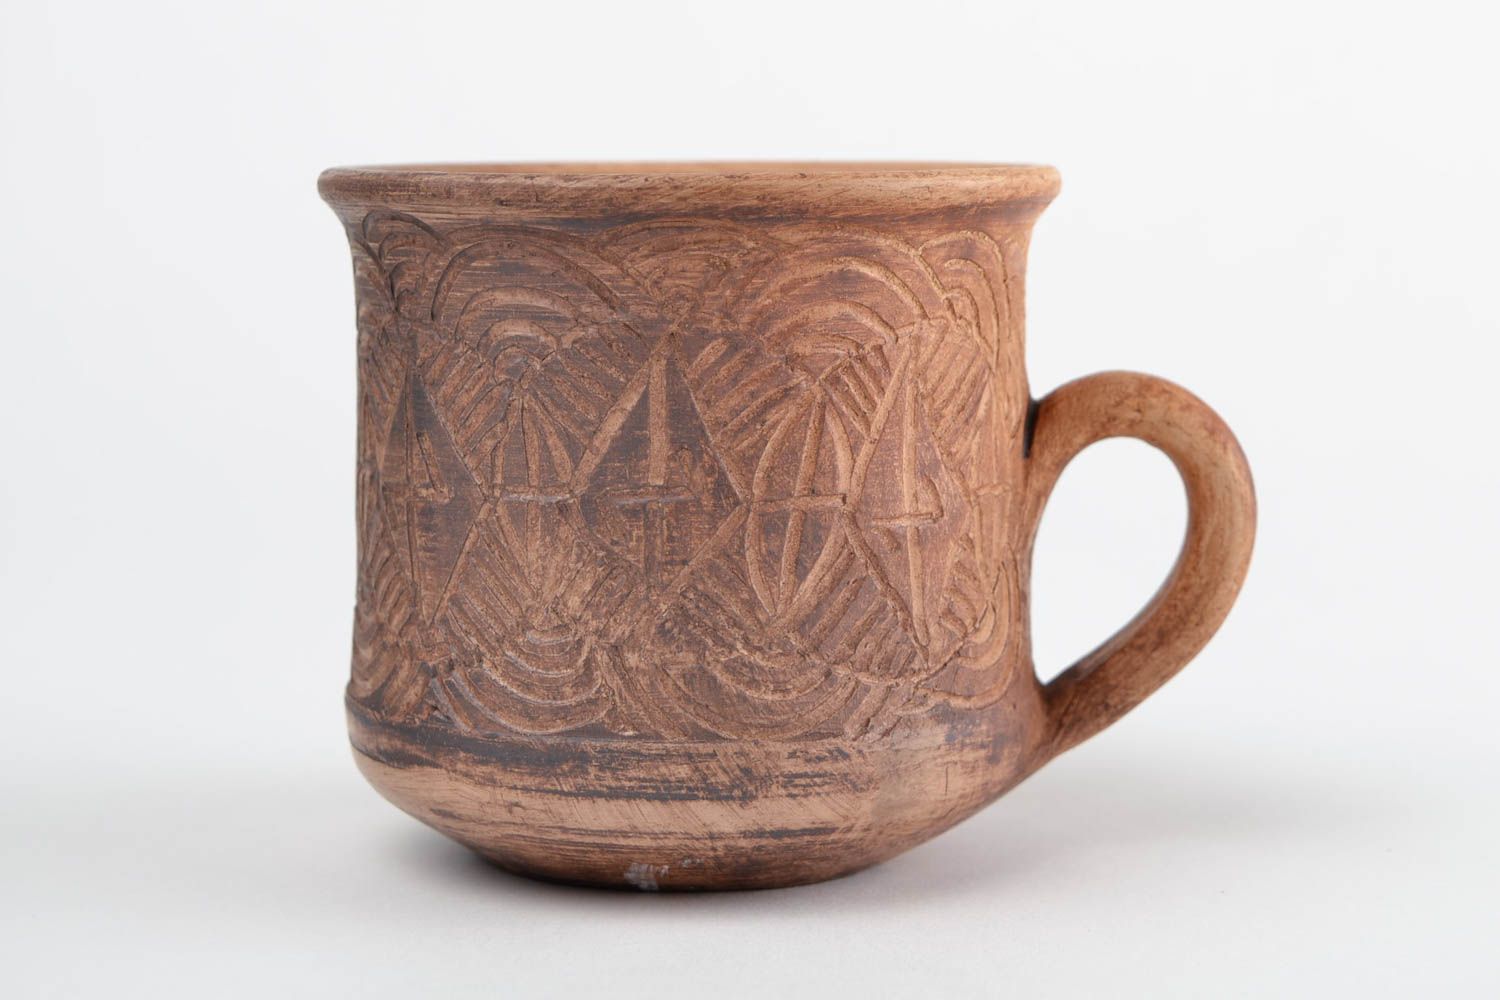 Medium size 5 oz clay cup with handle and rustic pattern photo 3